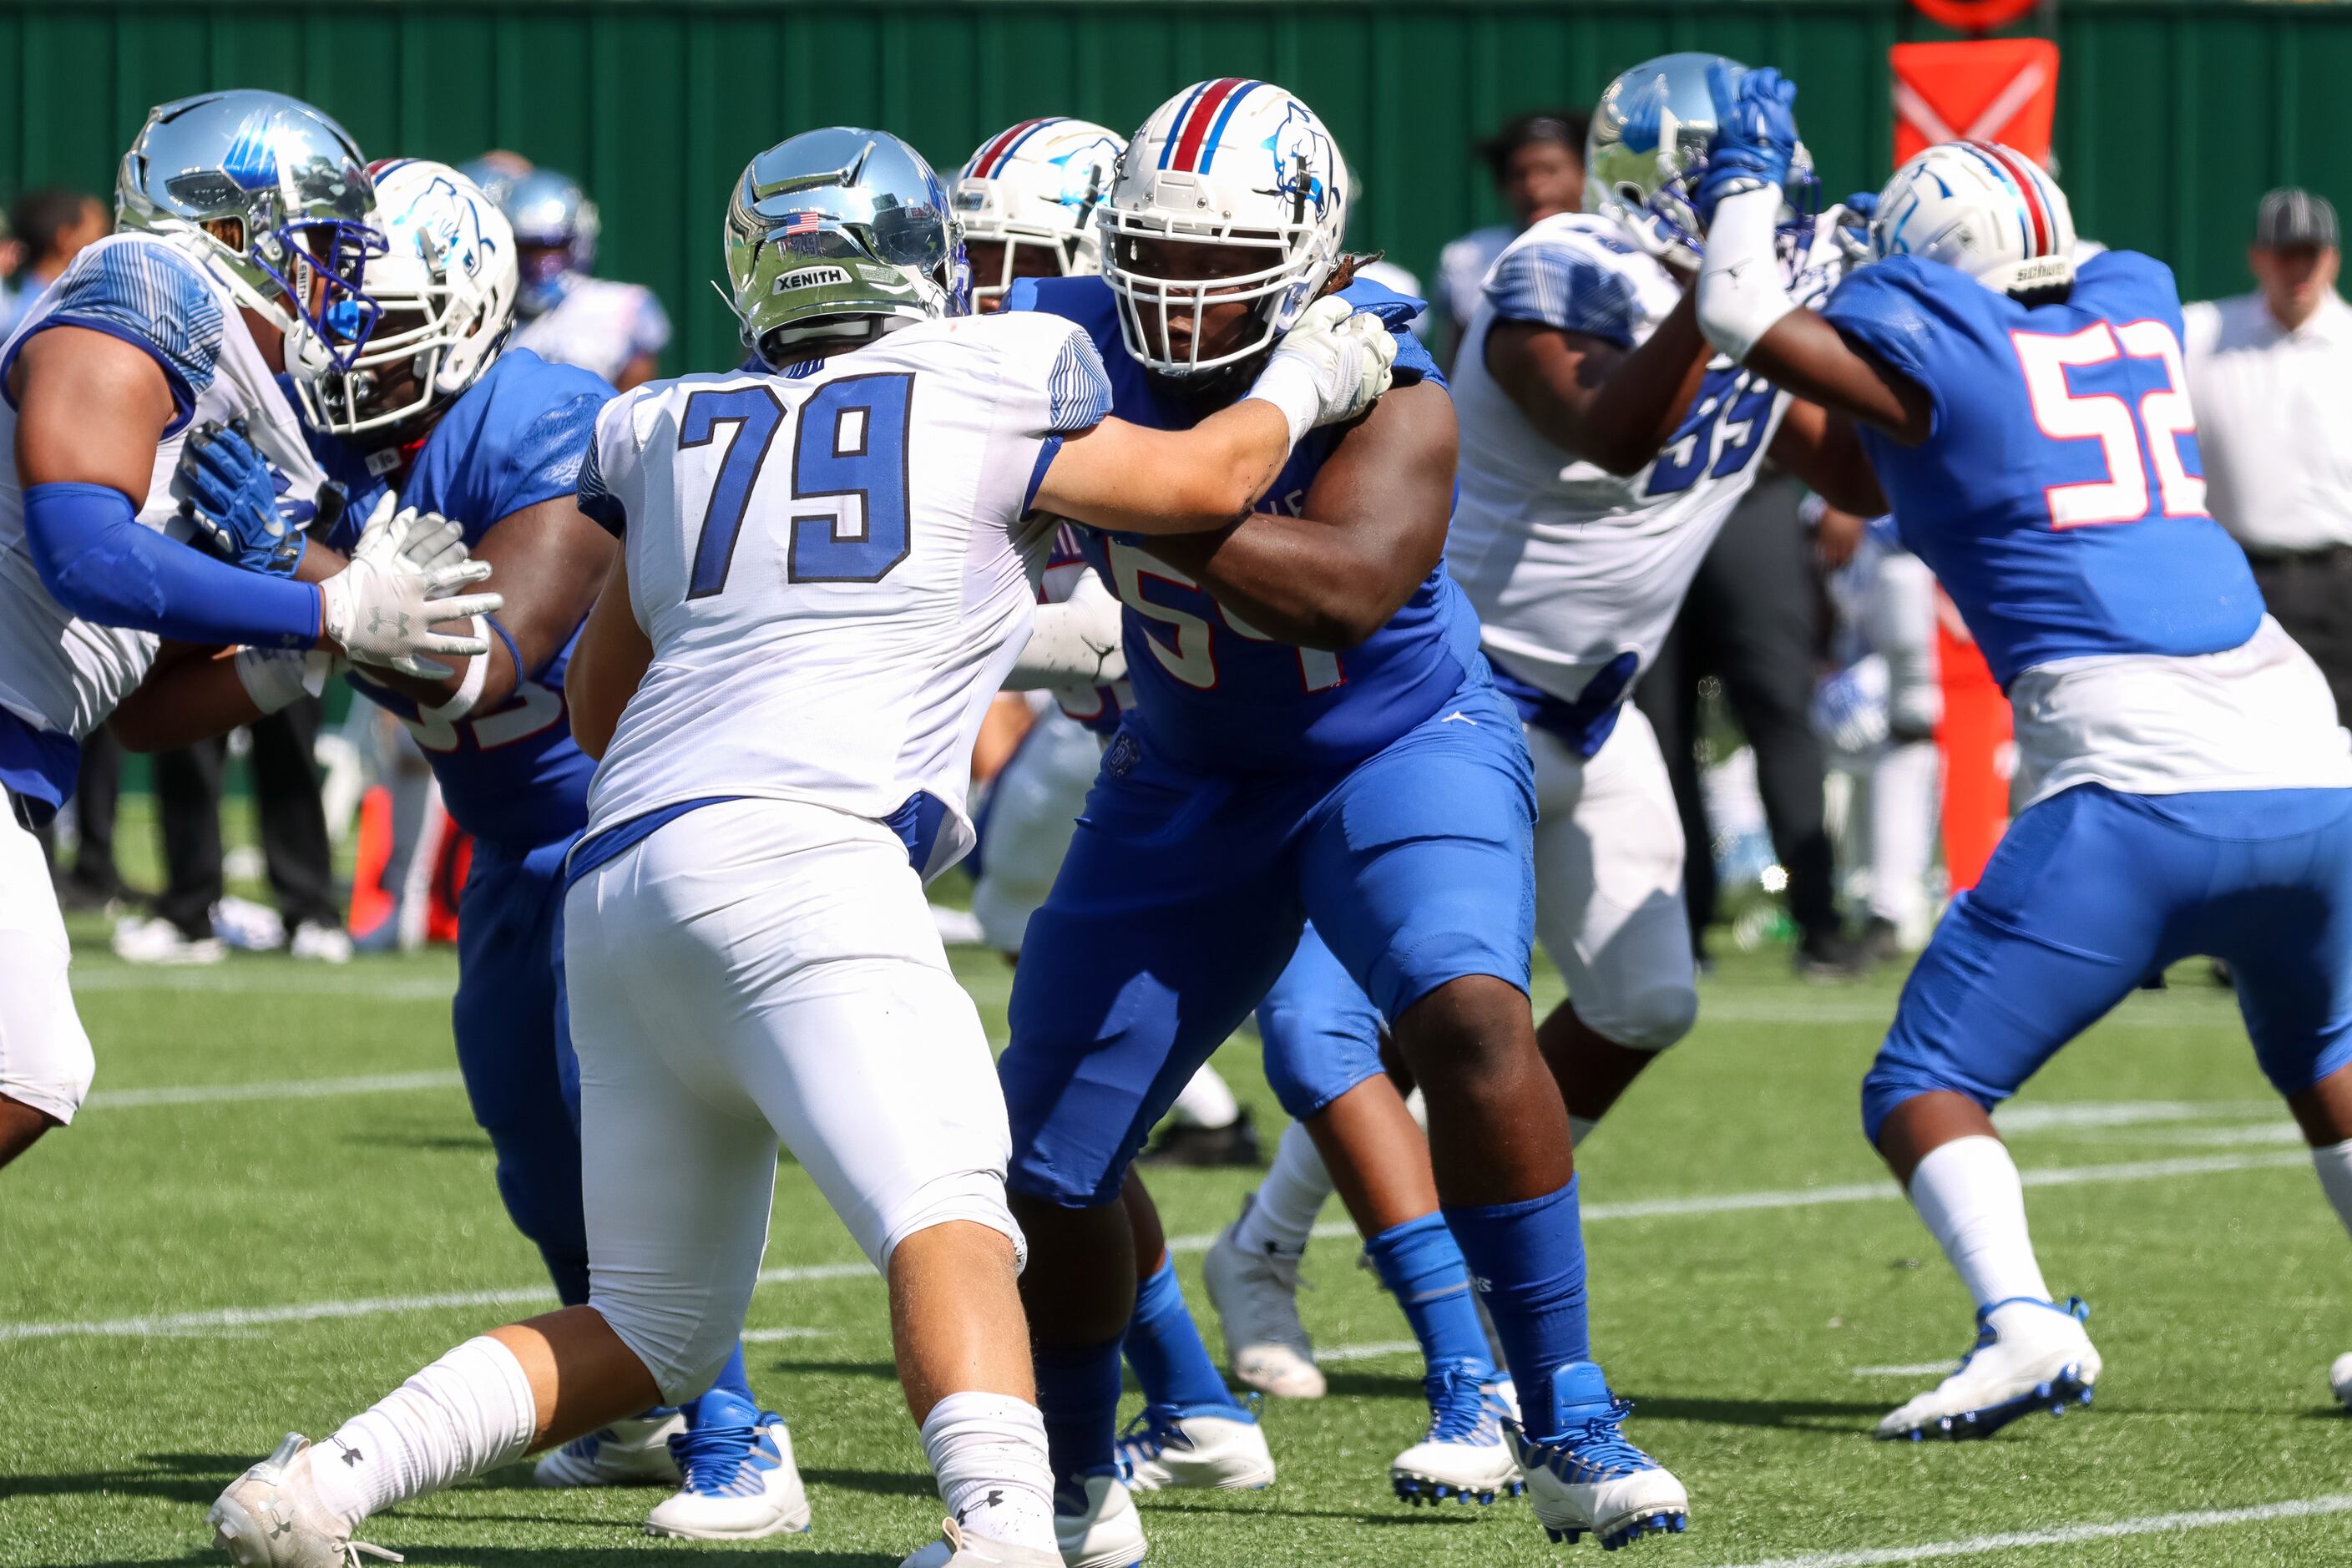 IMG Academy defensive lineman Liam McCormick (79) rushes Duncanville offensive lineman...